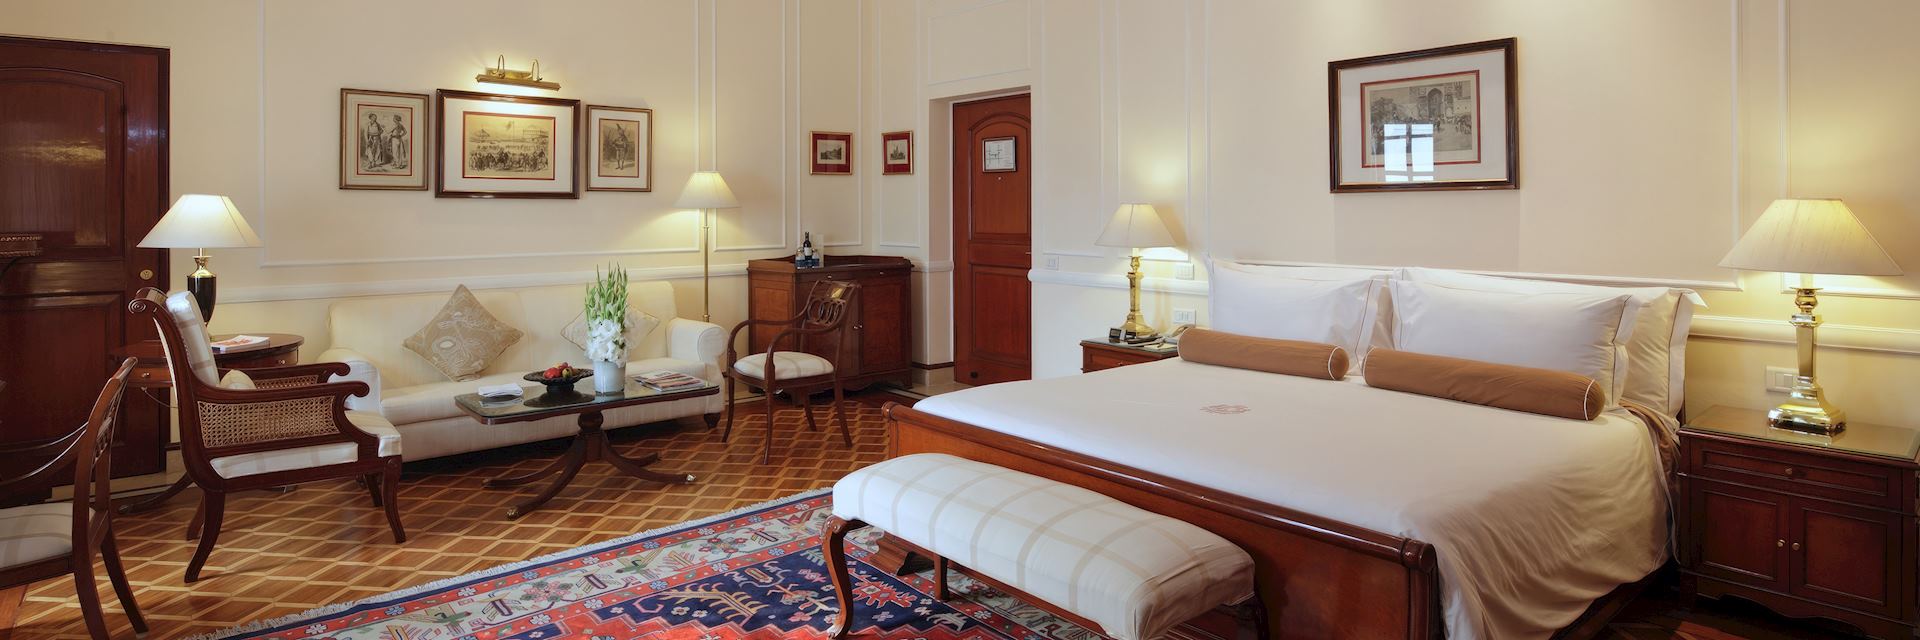 Grand Heritage Room, The Imperial